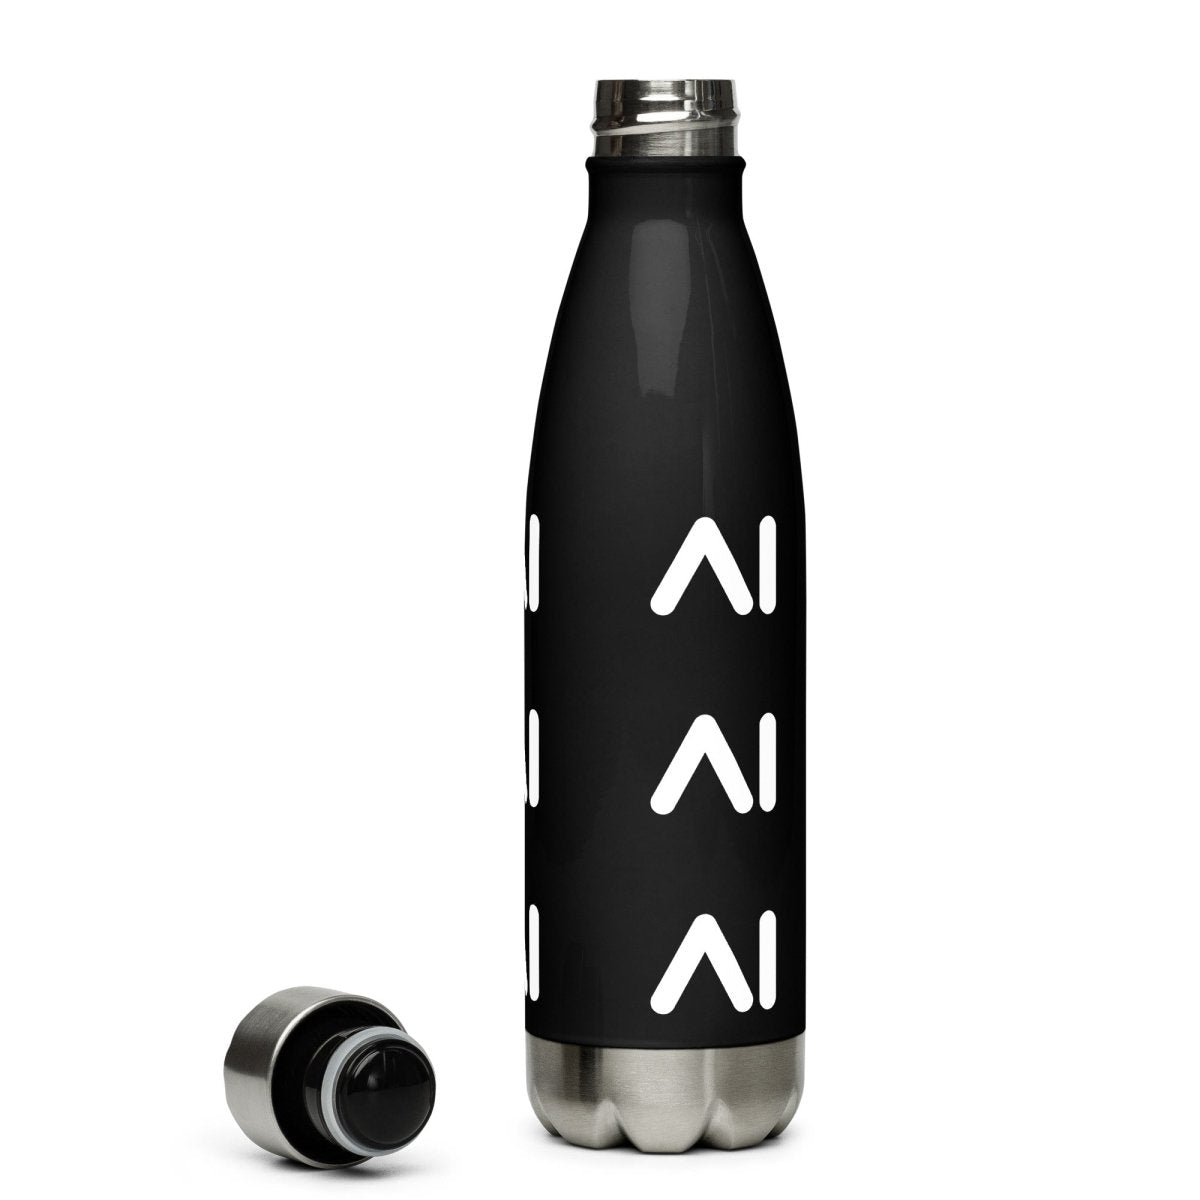 AI Logo Stainless Steel Water Bottle - AI Store